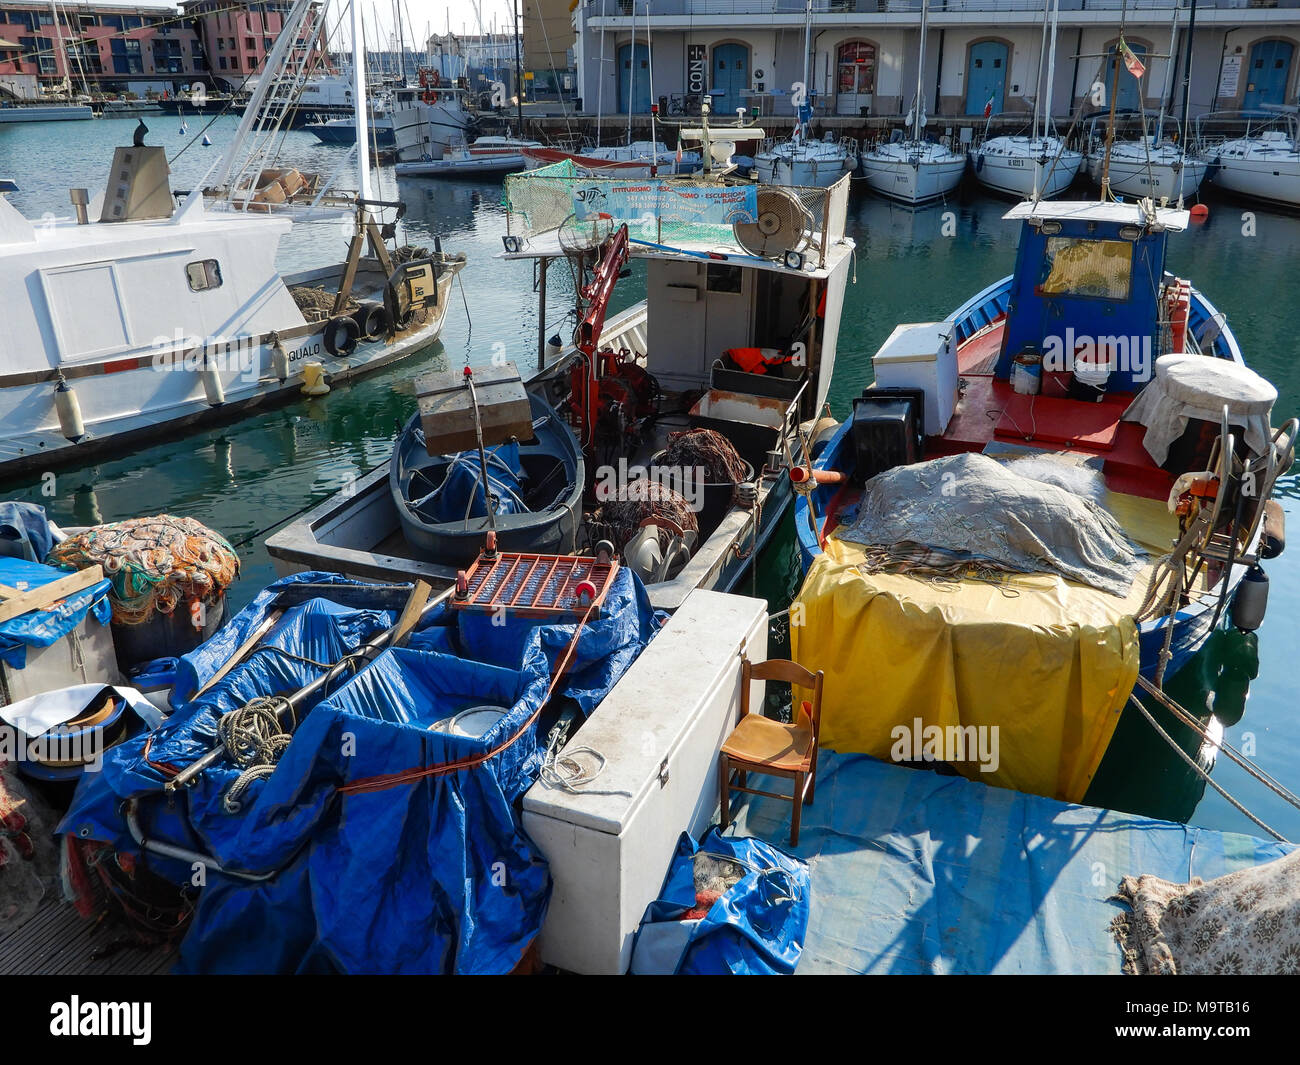 Fishing boats moored in the port. Stock Photo